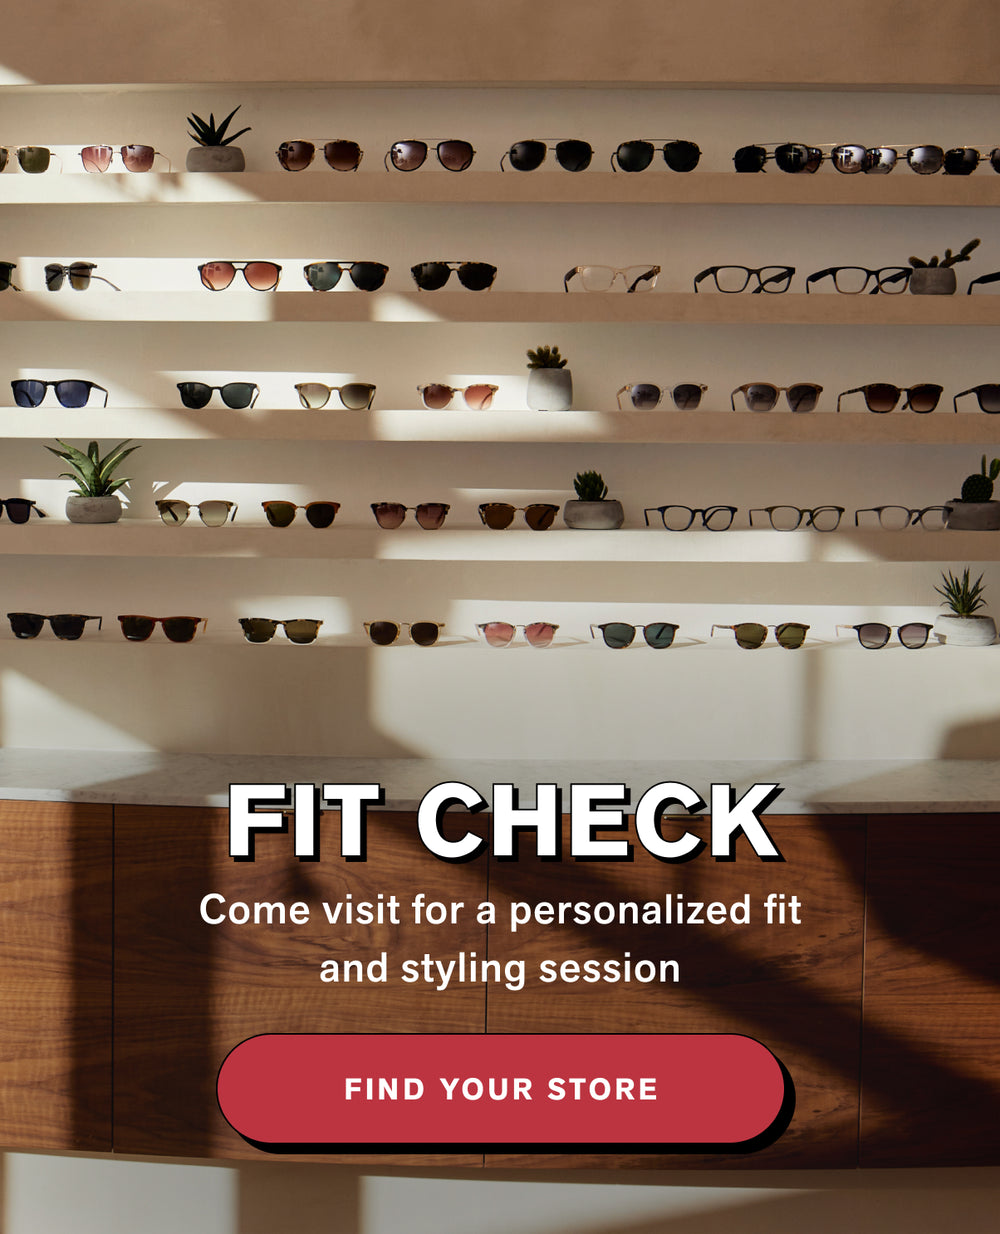 FIT CHECK  Come visit for a personalized fit and styling session  Find Your Store